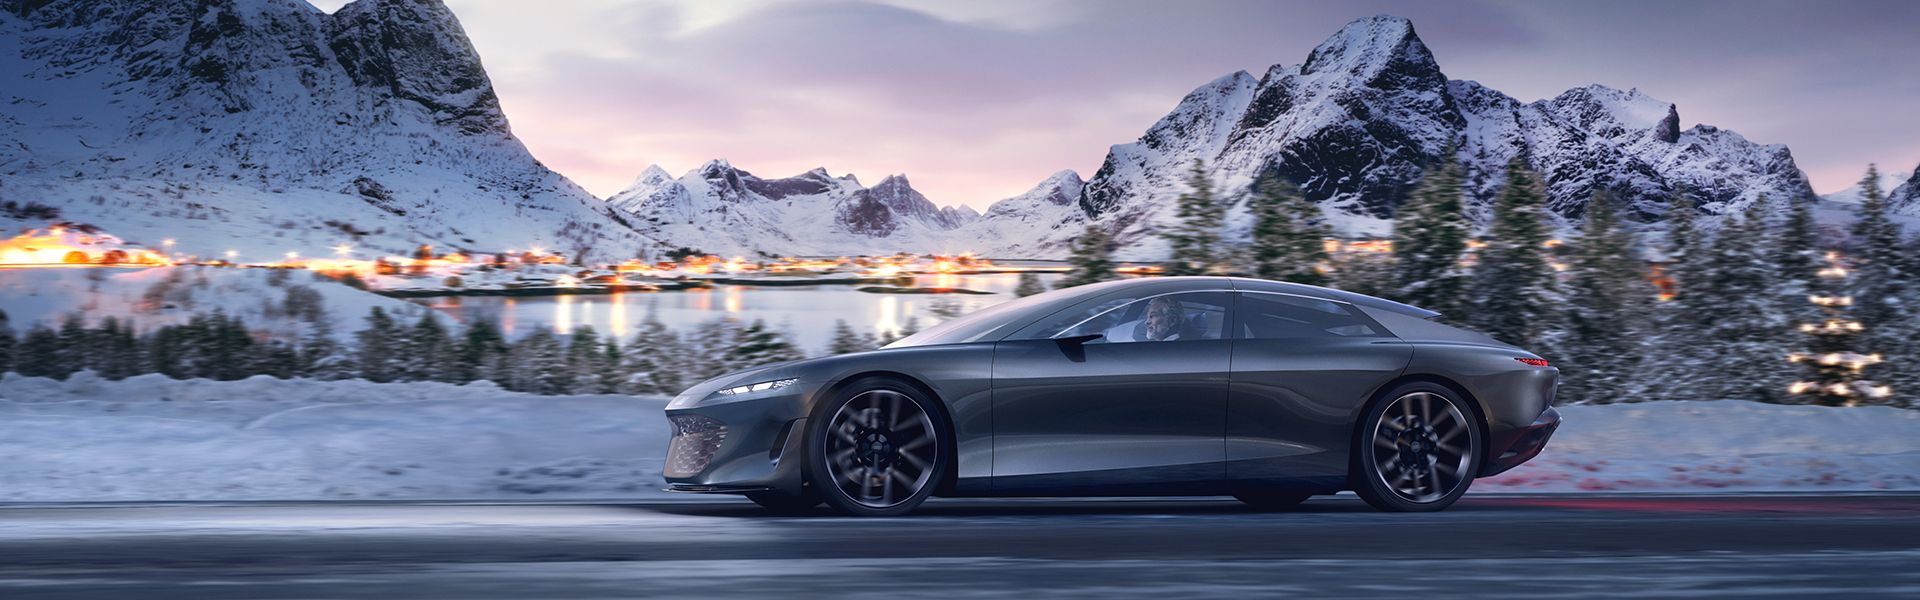 The Audi grandsphere concept driving on the road in a snowy landscape with mountains in the background.